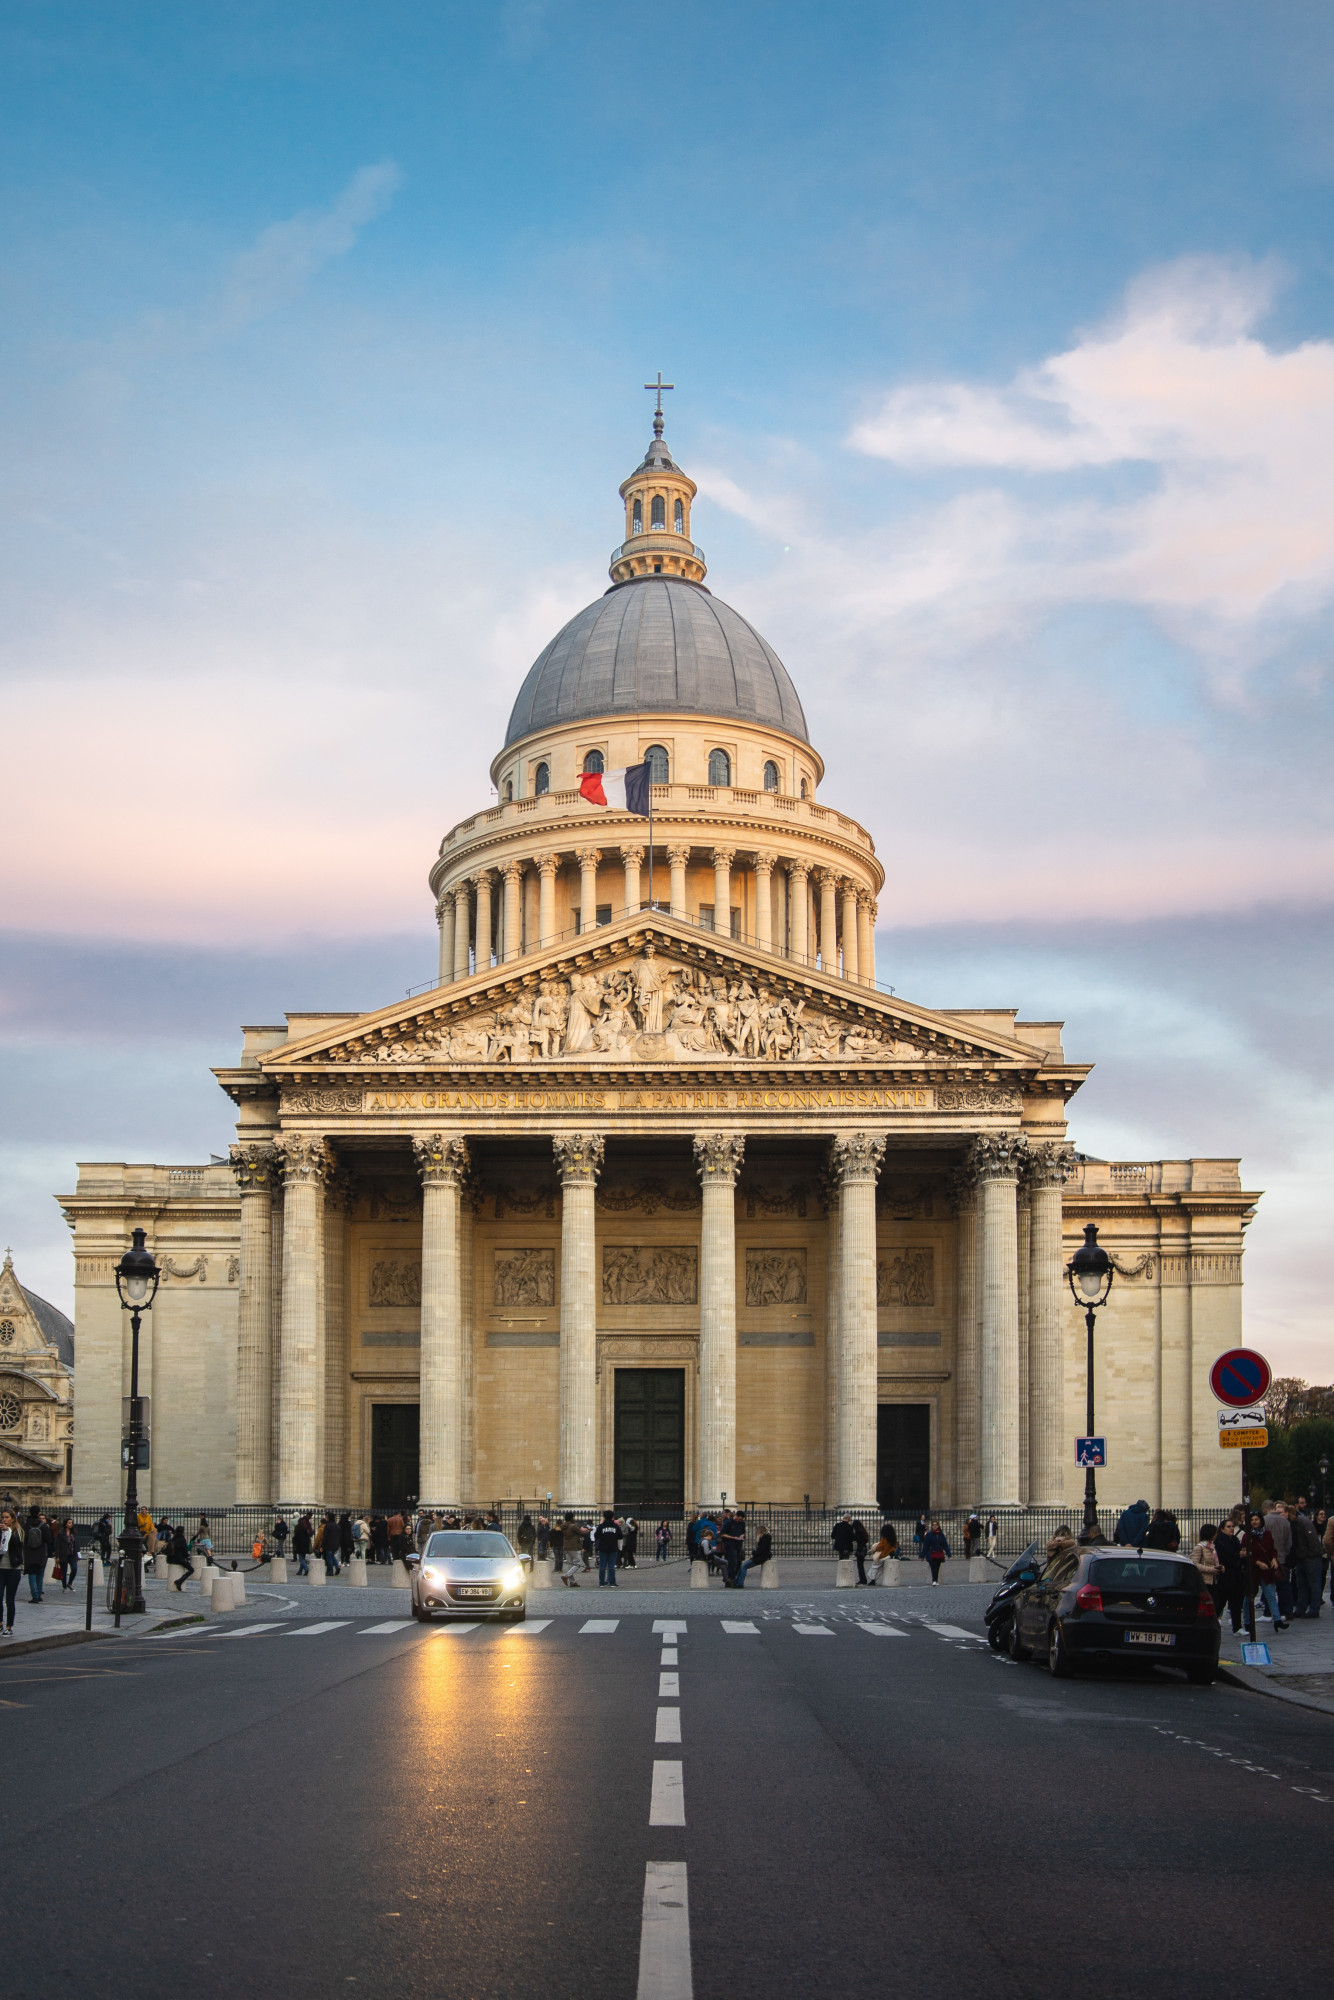 pantheon surrounded by people cloudy sky during sunset paris france